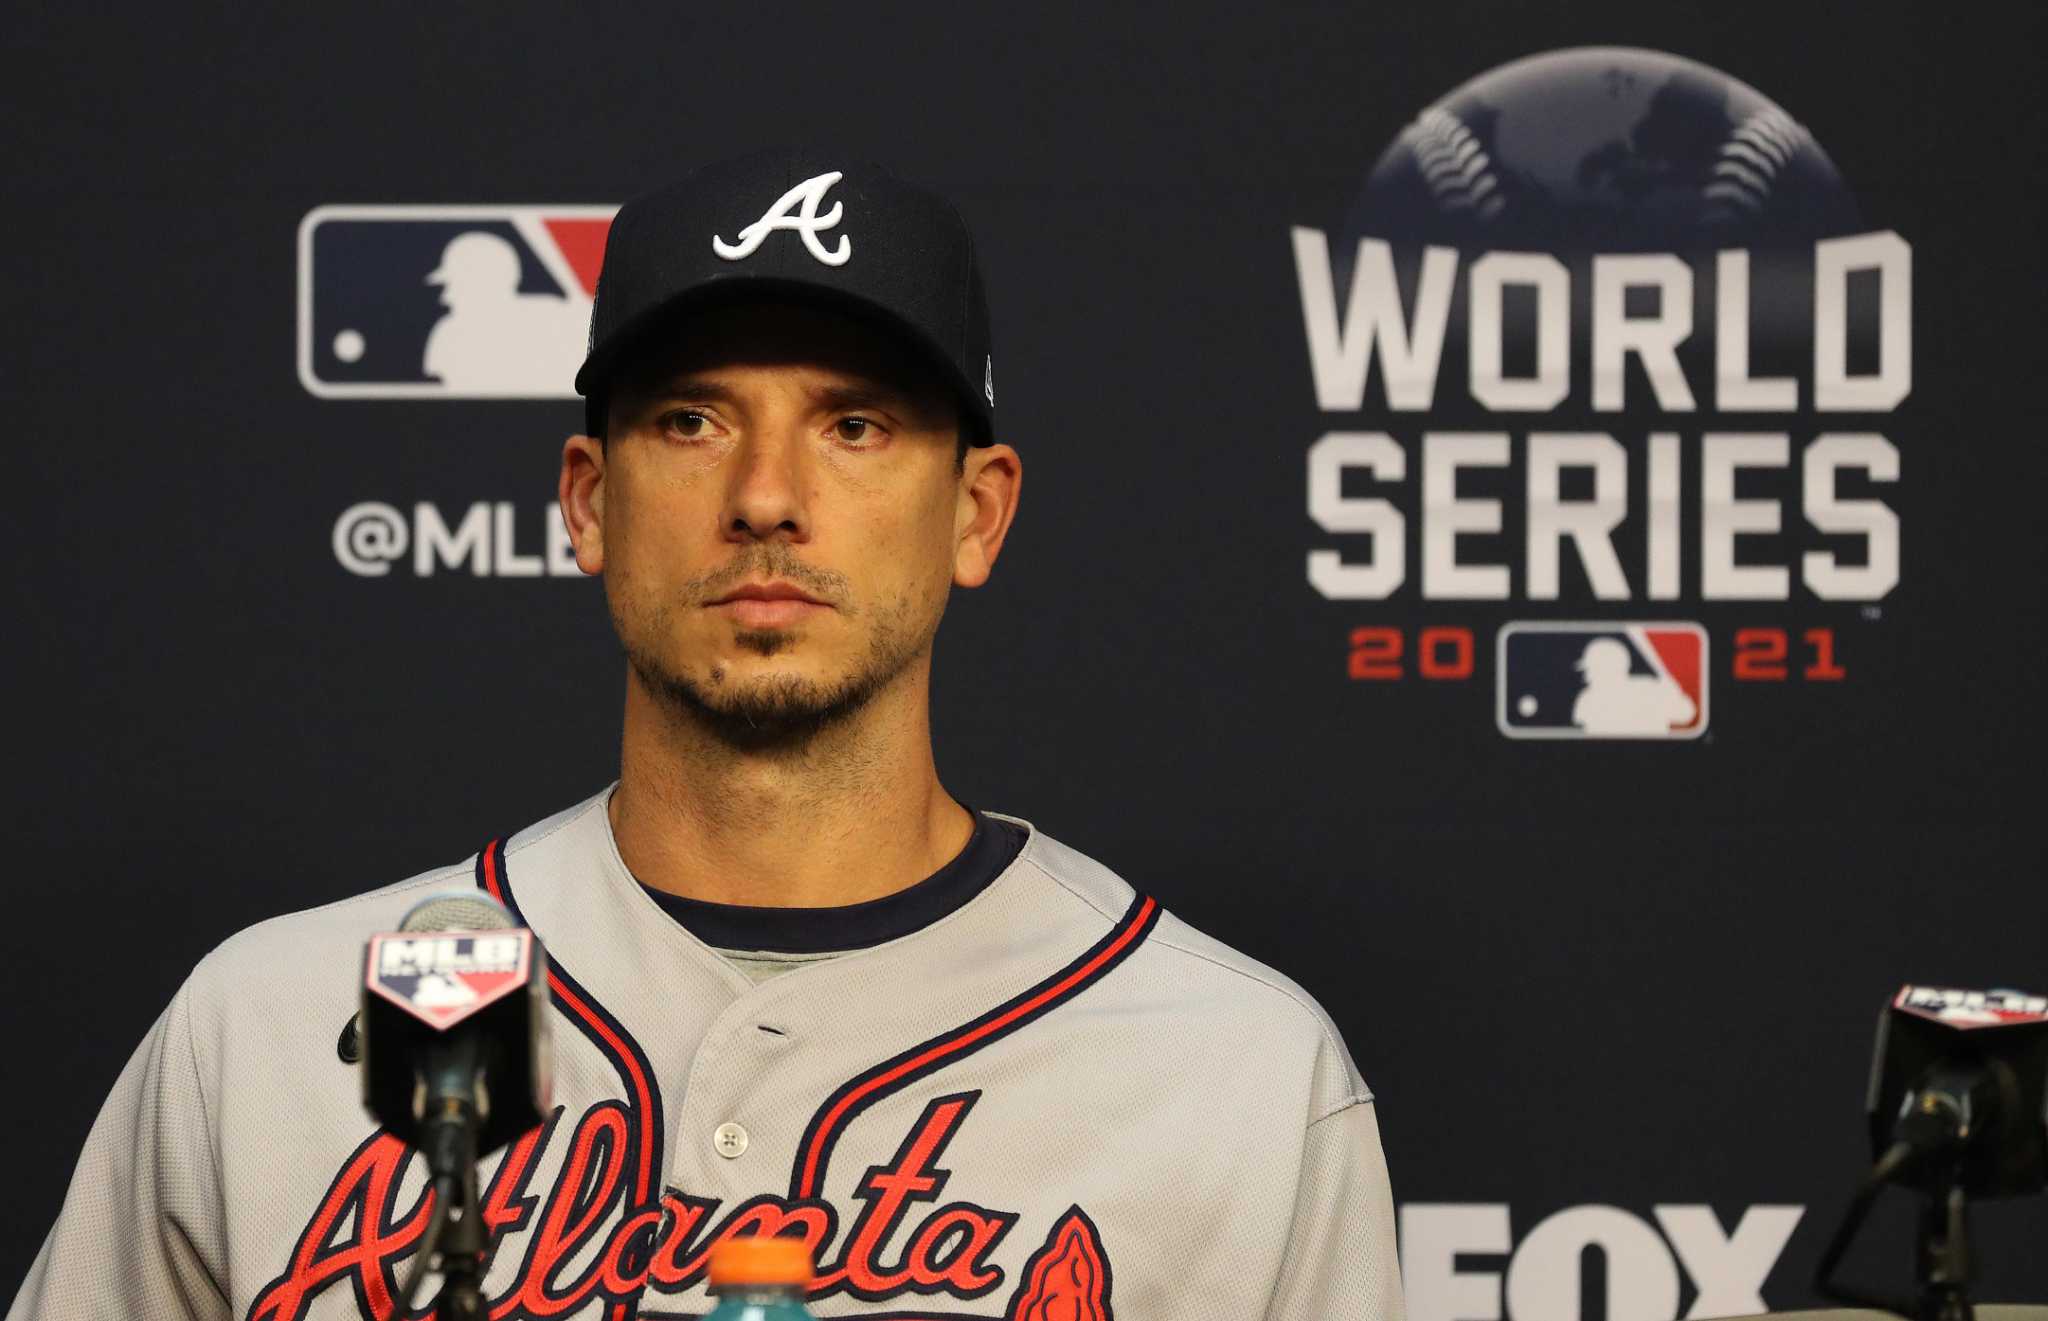 Meet Charlie Morton, the former Connecticut high school star who's